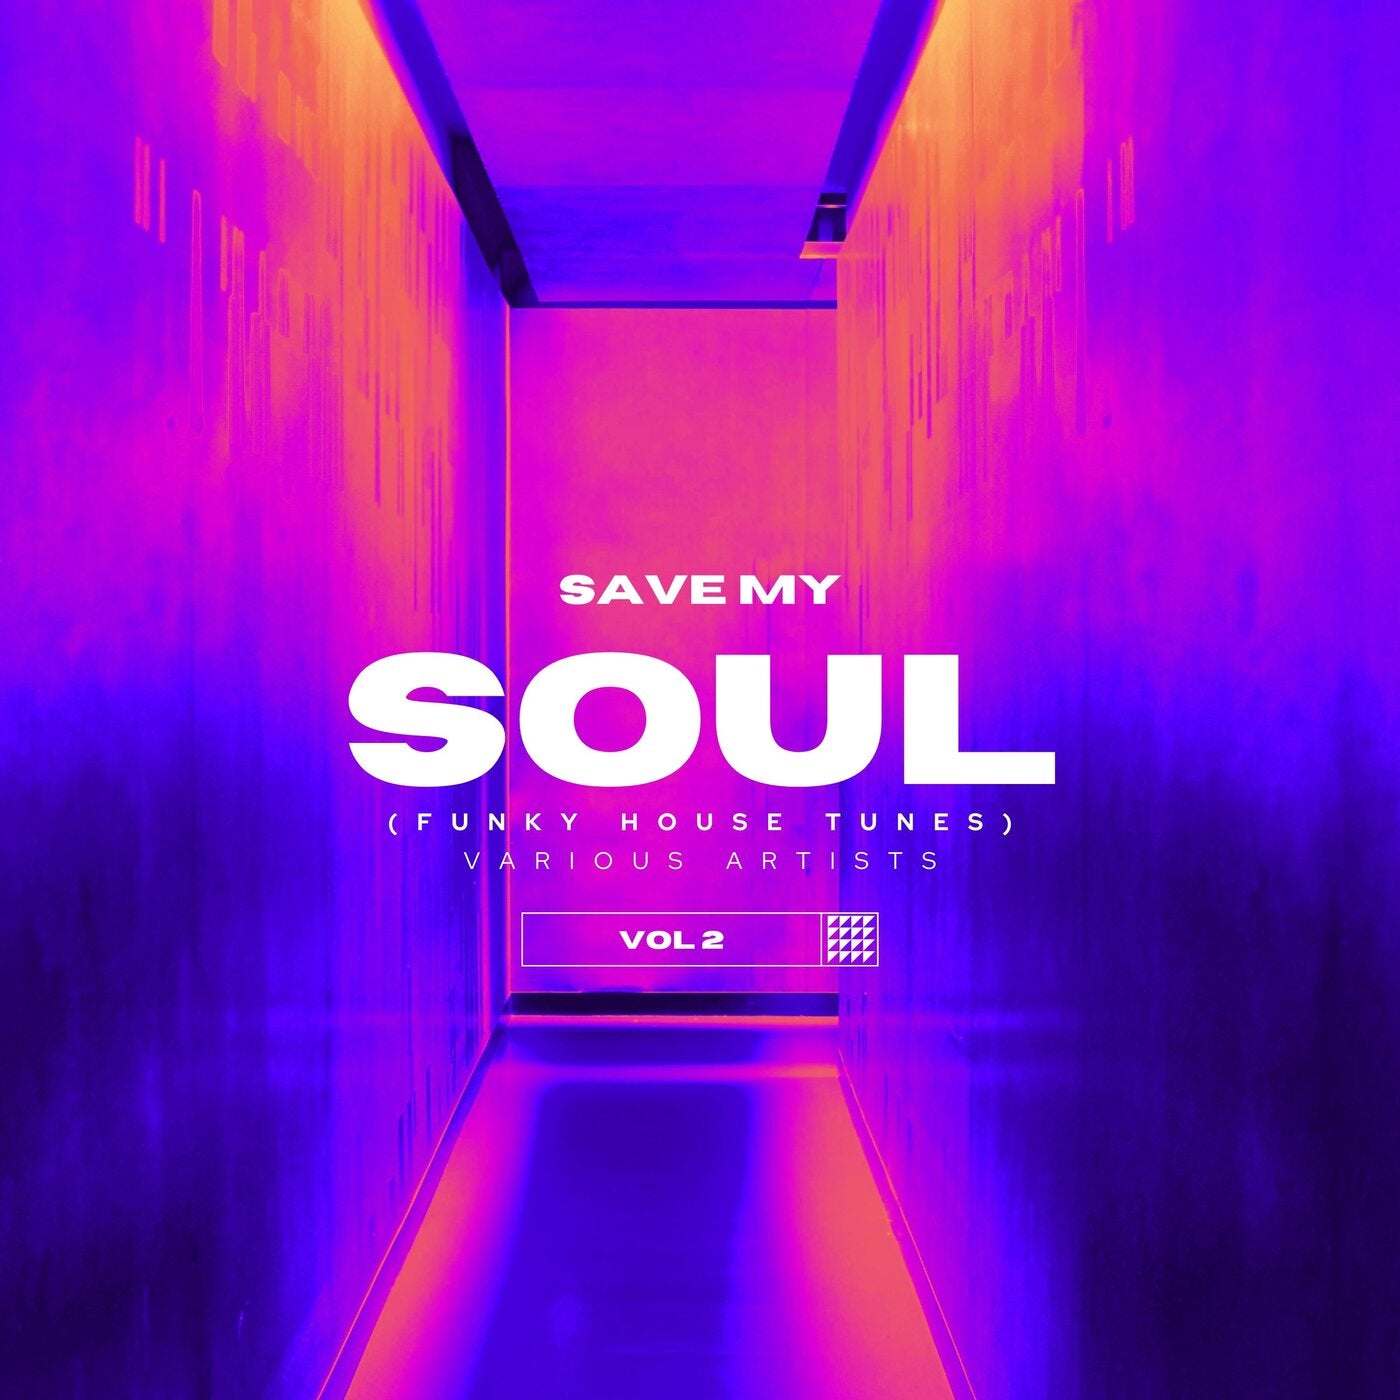 Save My Soul (Funky House Tunes), Vol. 2